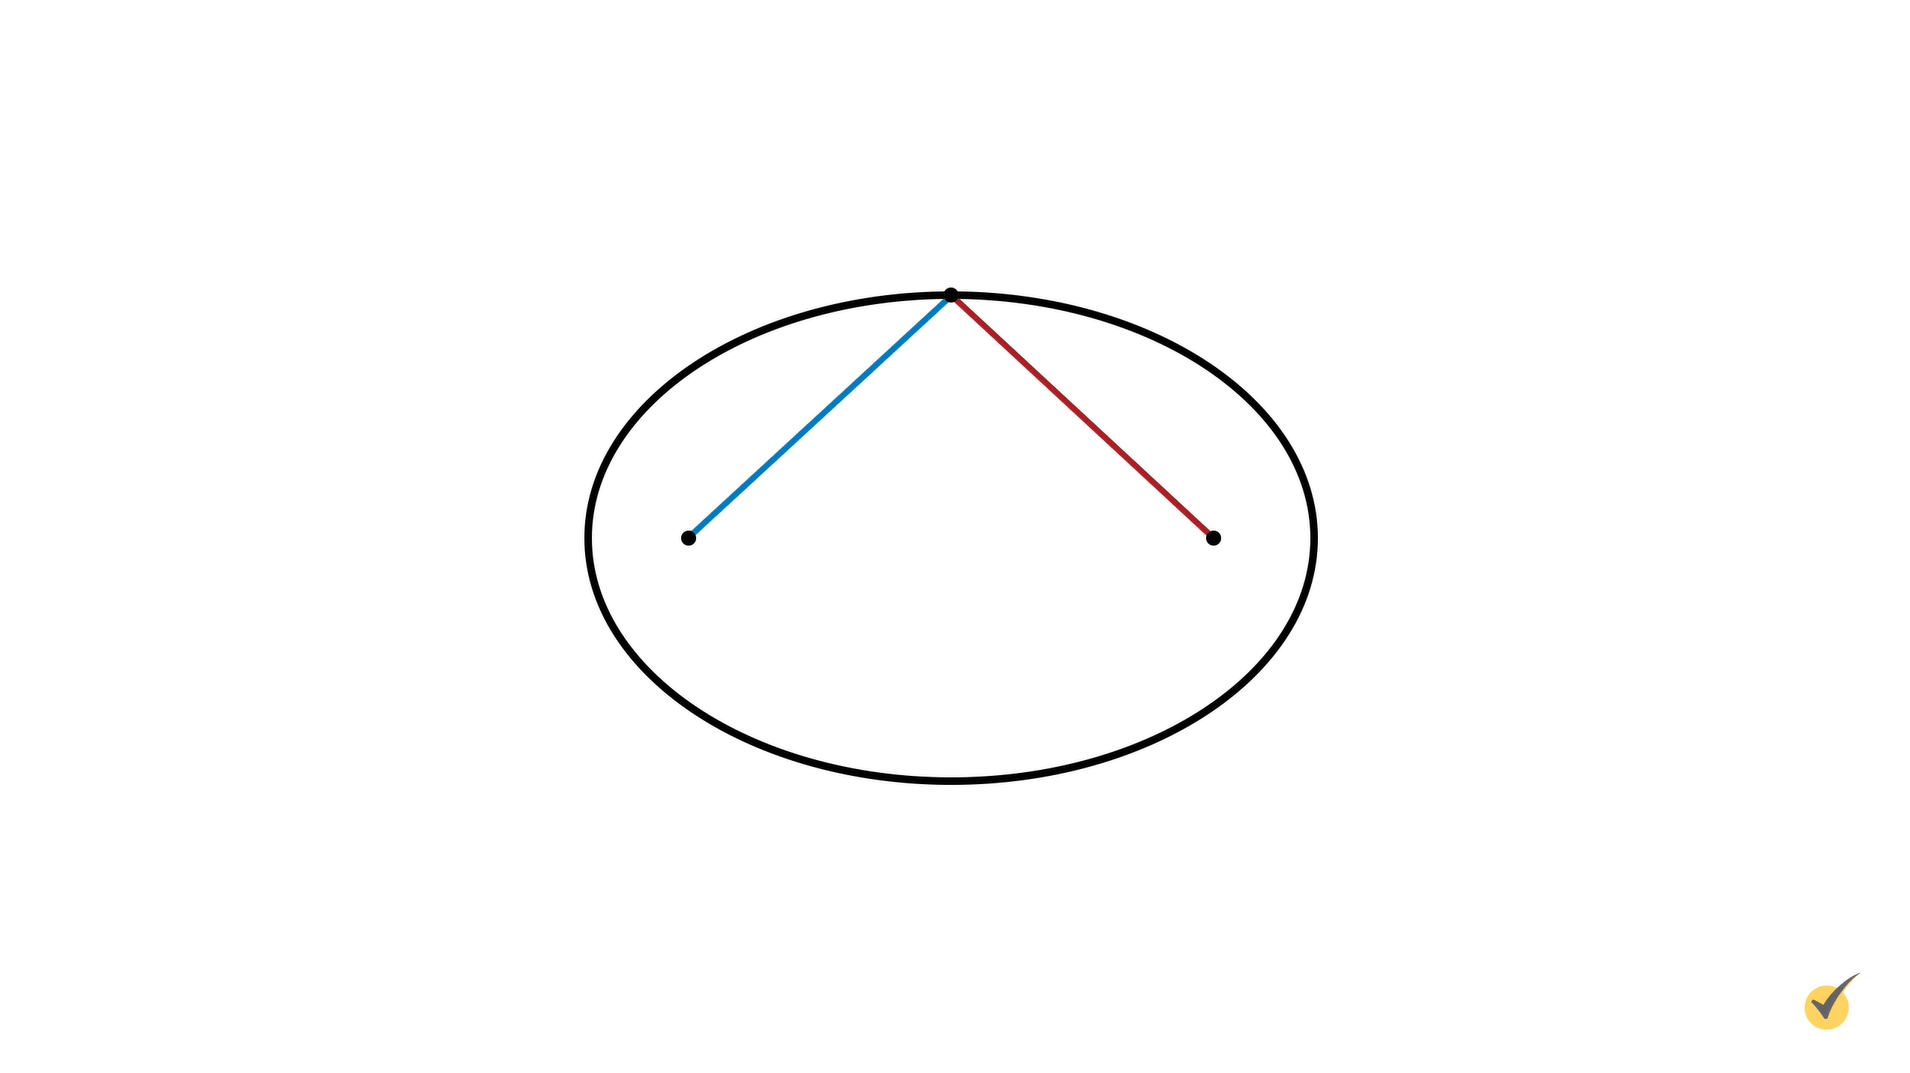 Ellipse with lines connecting to the foci